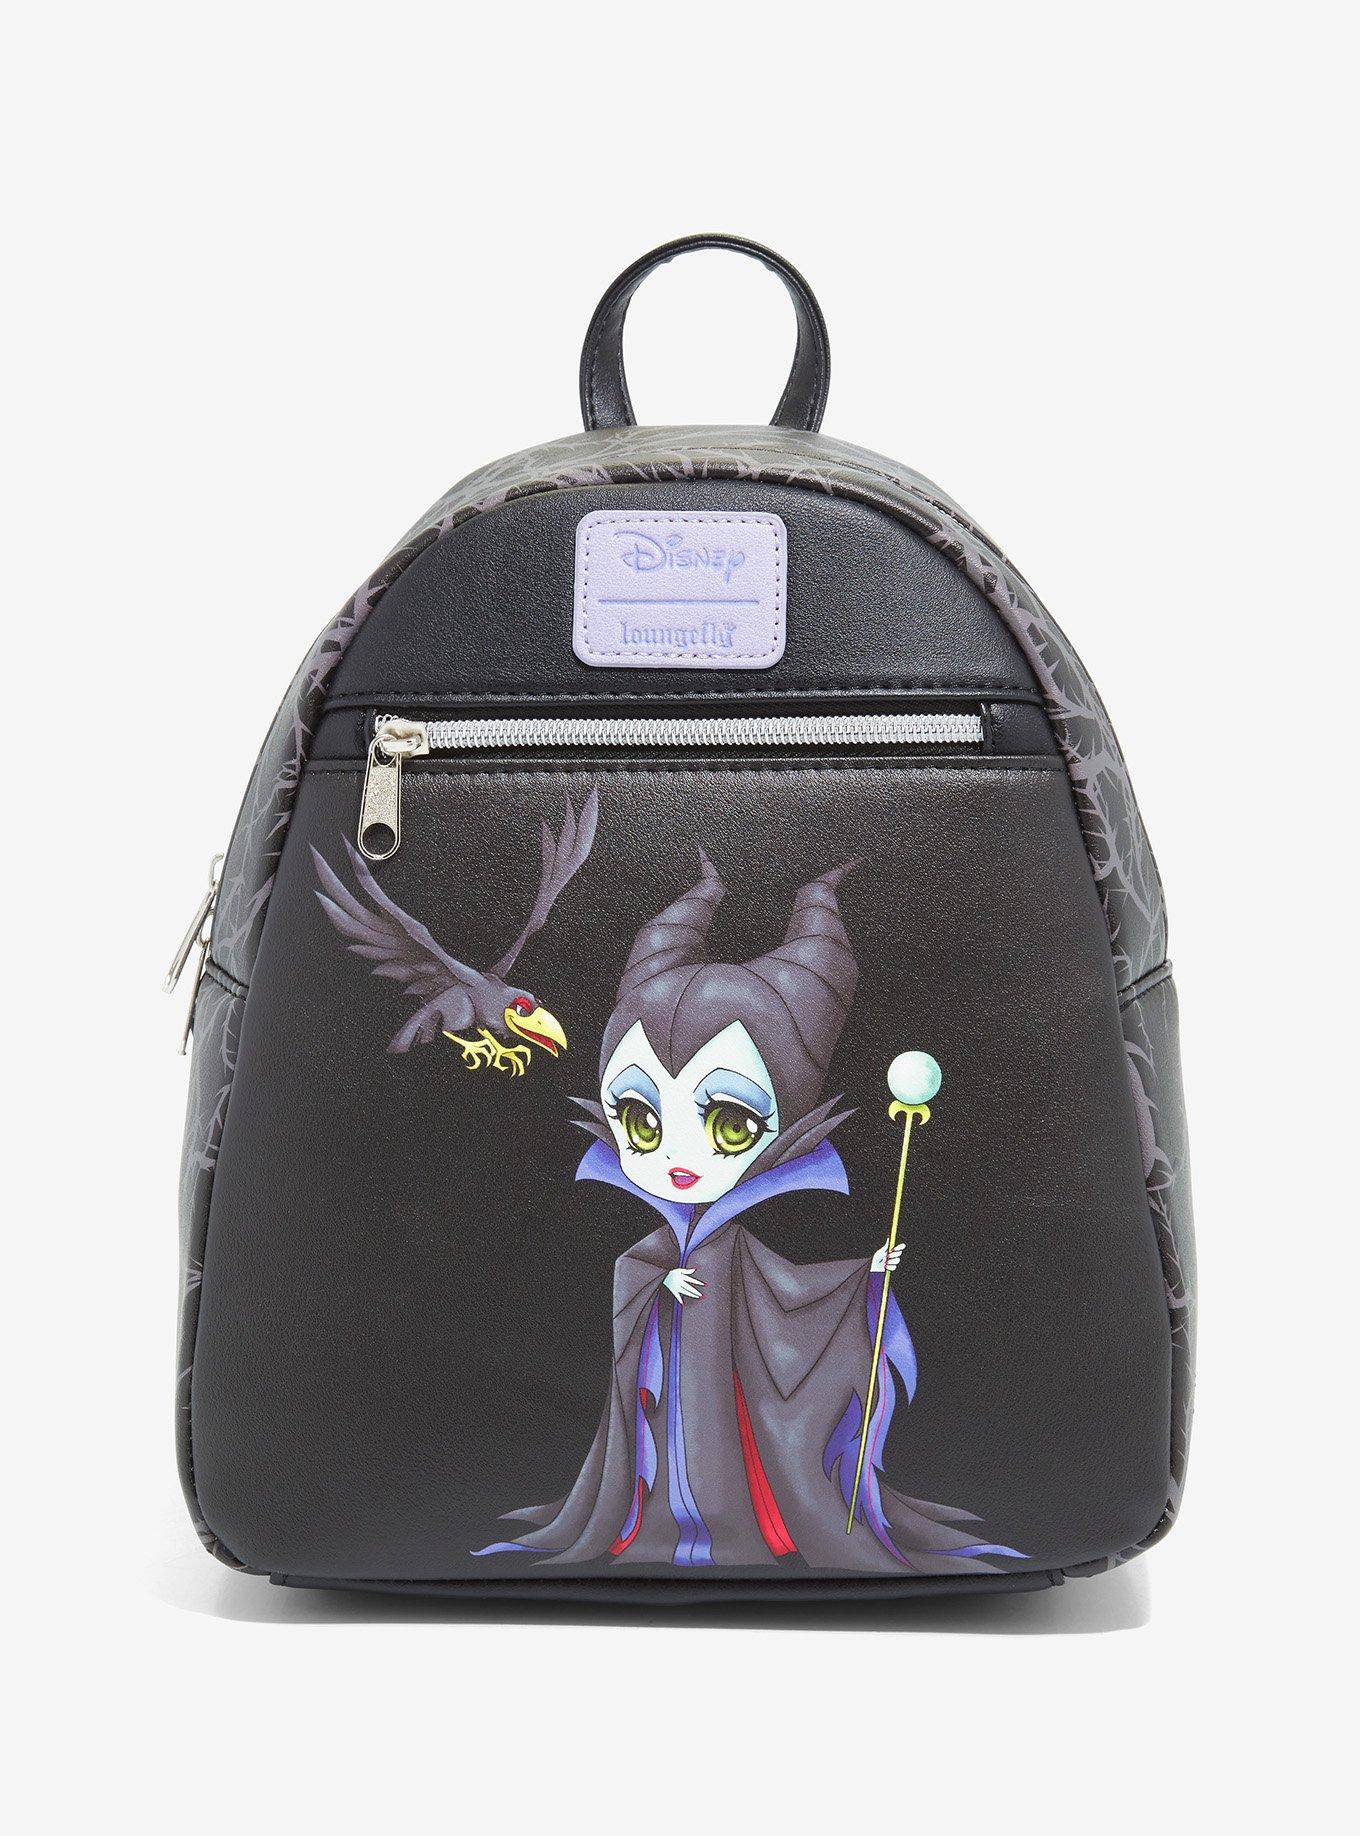 Loungefly Exclusive Disney Maleficent Mini Backpack - $114 New With Tags -  From Joanna